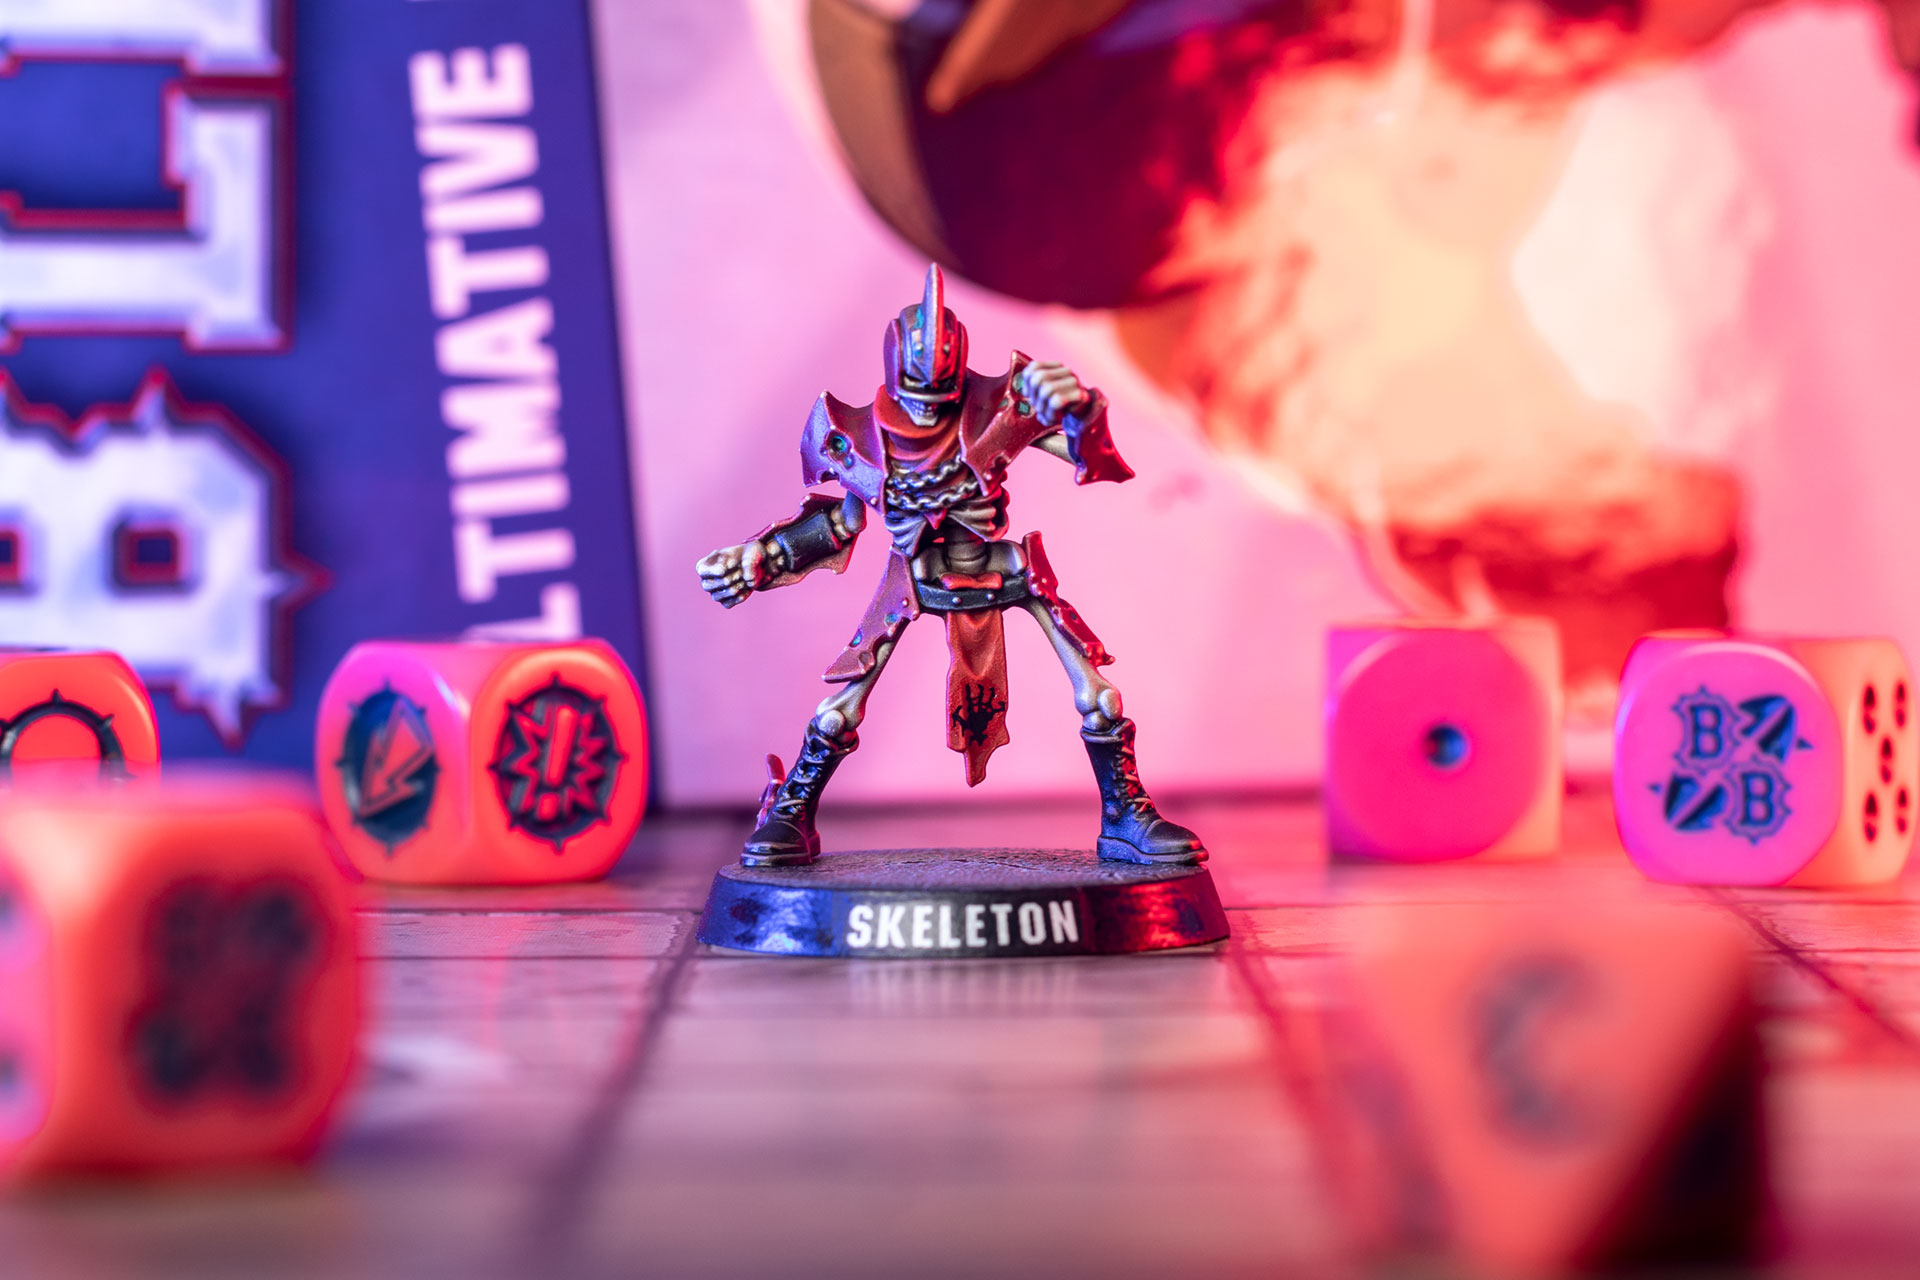 Cinematic shot of a Blood Bowl Skeleton with some dice on the Blitz Bowl gaming board